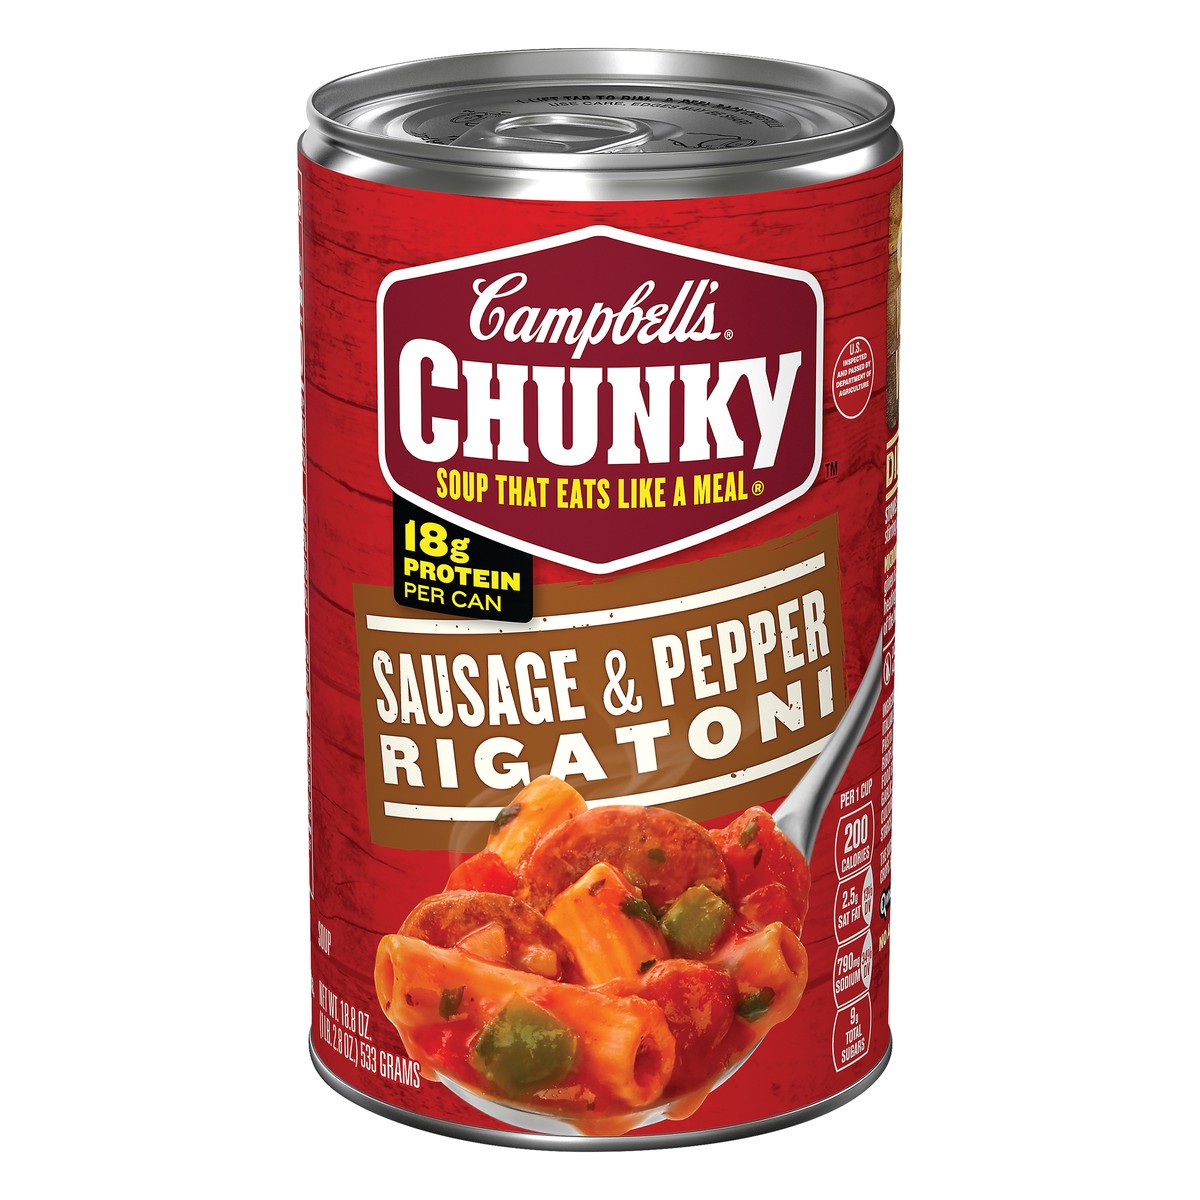 slide 1 of 13, Campbell's Chunky Soup, Sausage & Pepper Rigatoni Soup, 18.8 Ounce Can, 18.8 oz